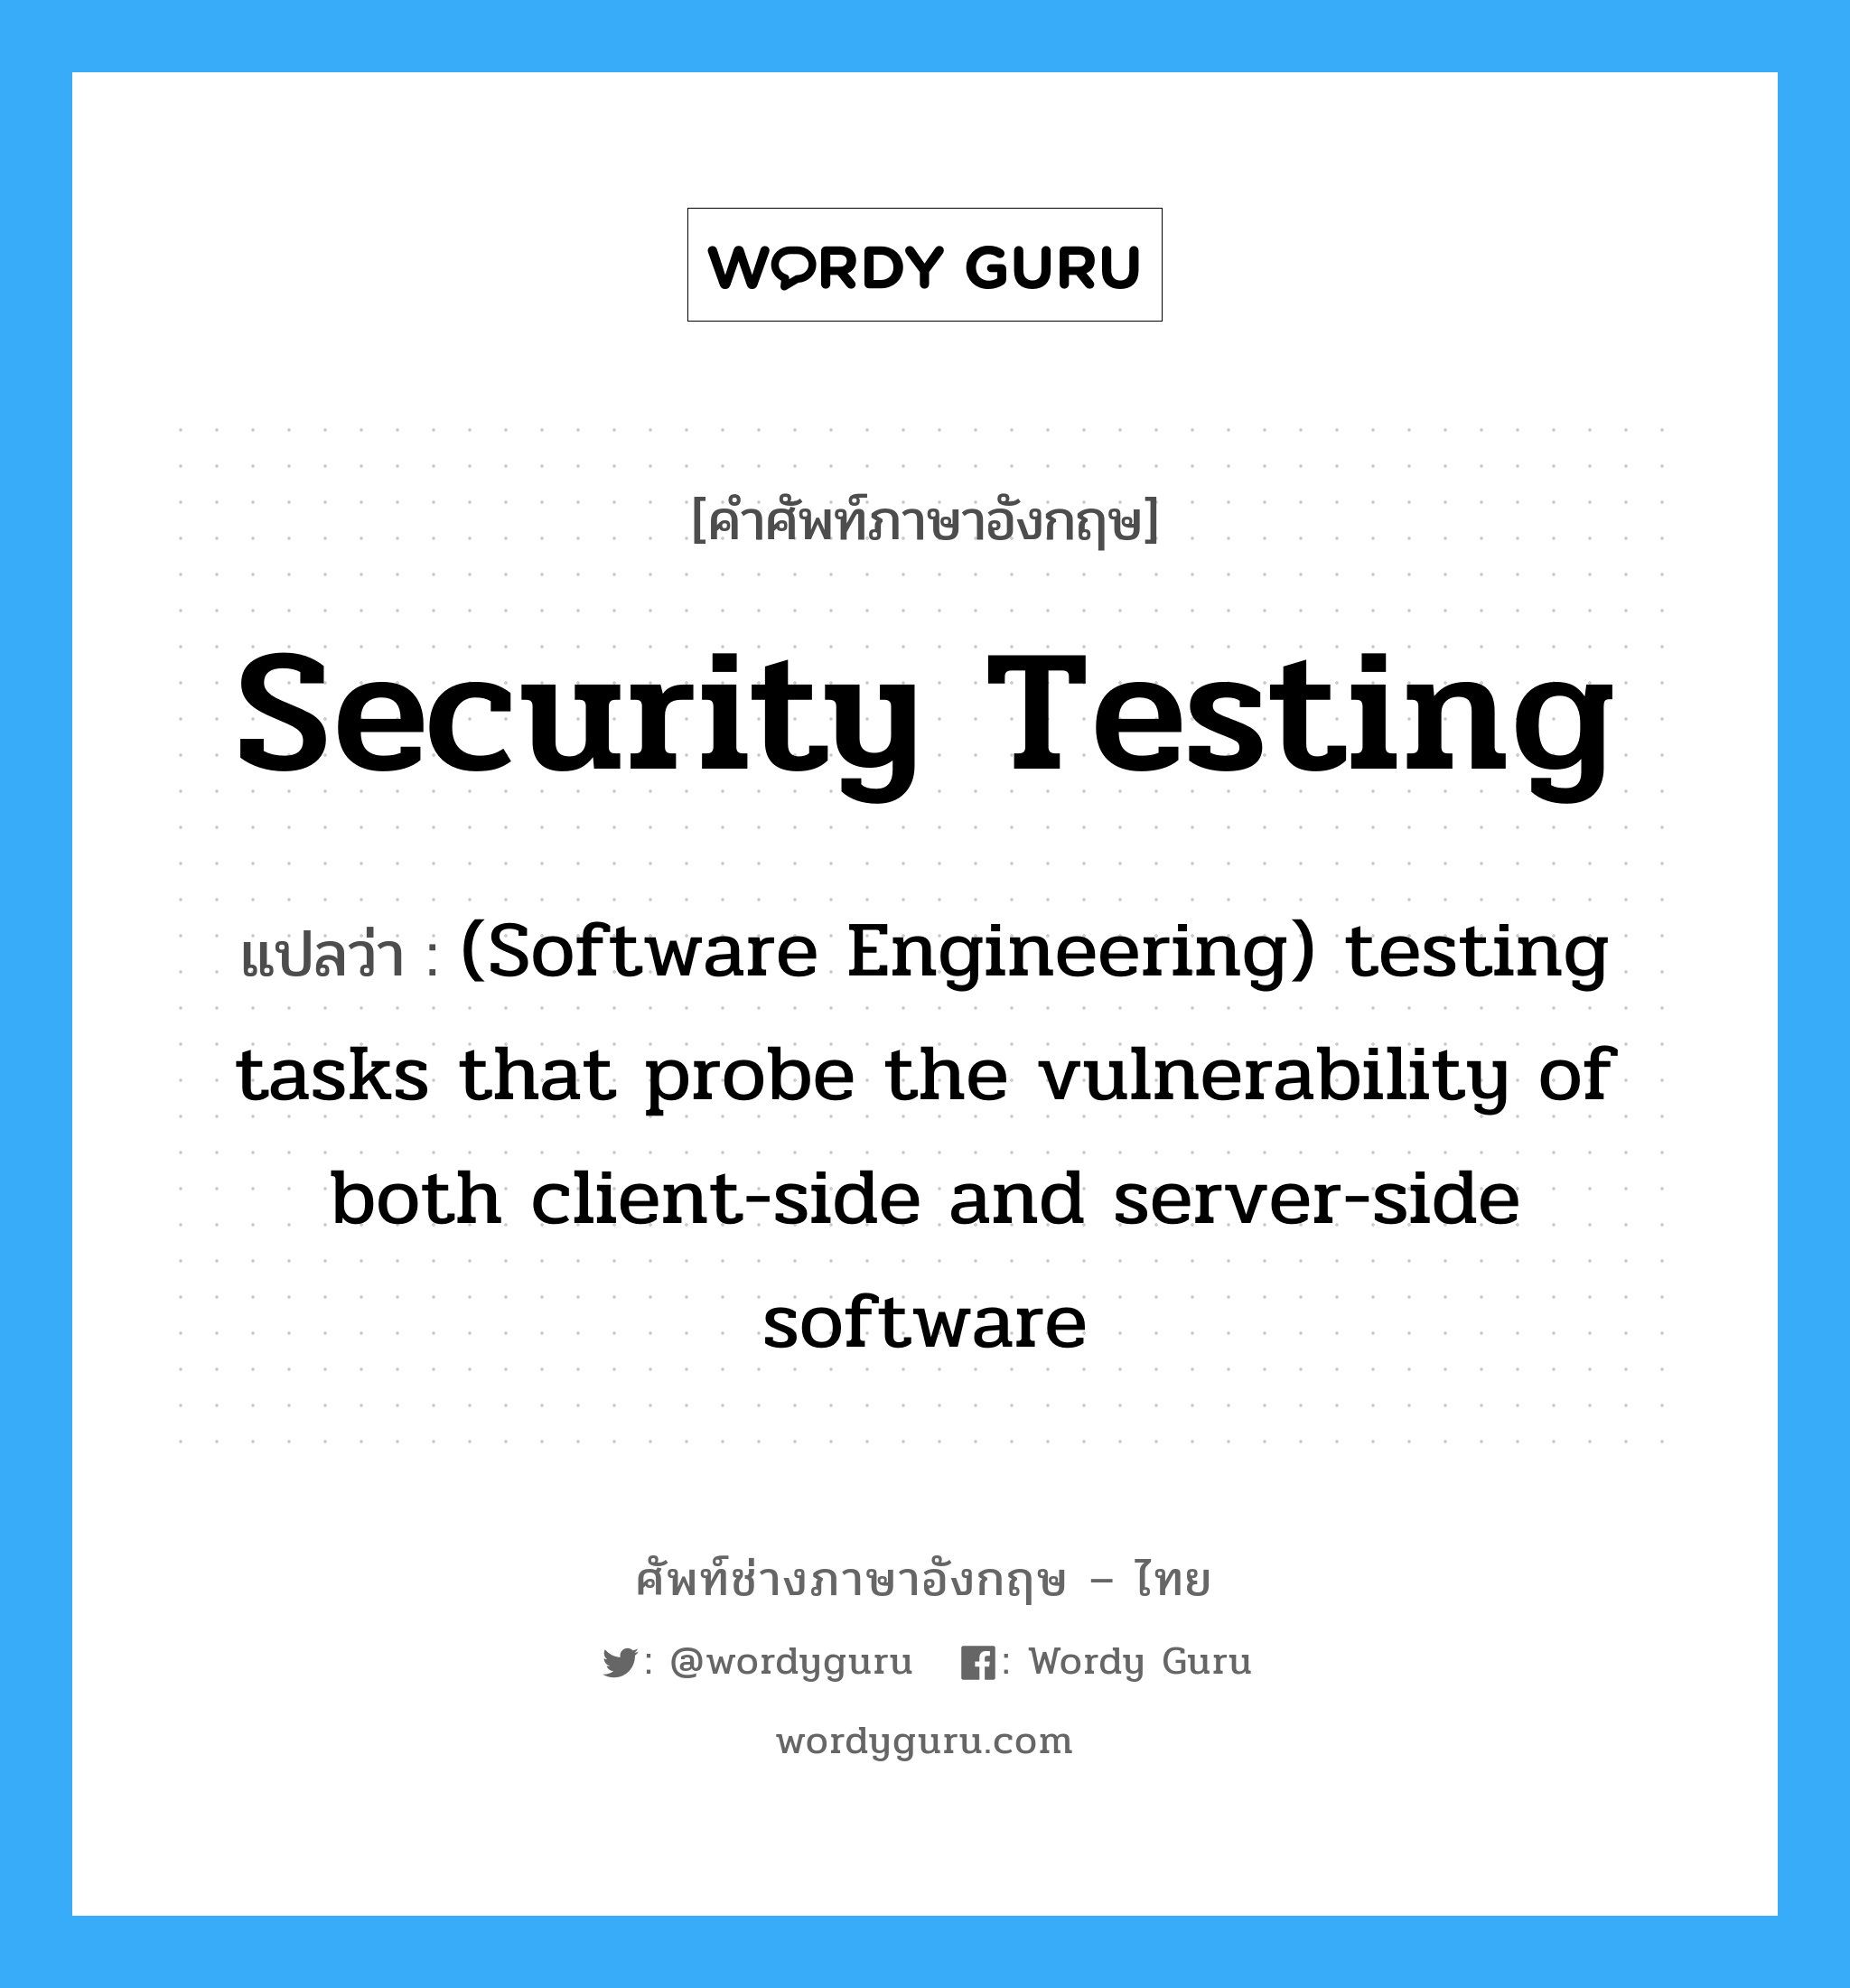 Security testing แปลว่า?, คำศัพท์ช่างภาษาอังกฤษ - ไทย Security testing คำศัพท์ภาษาอังกฤษ Security testing แปลว่า (Software Engineering) testing tasks that probe the vulnerability of both client-side and server-side software